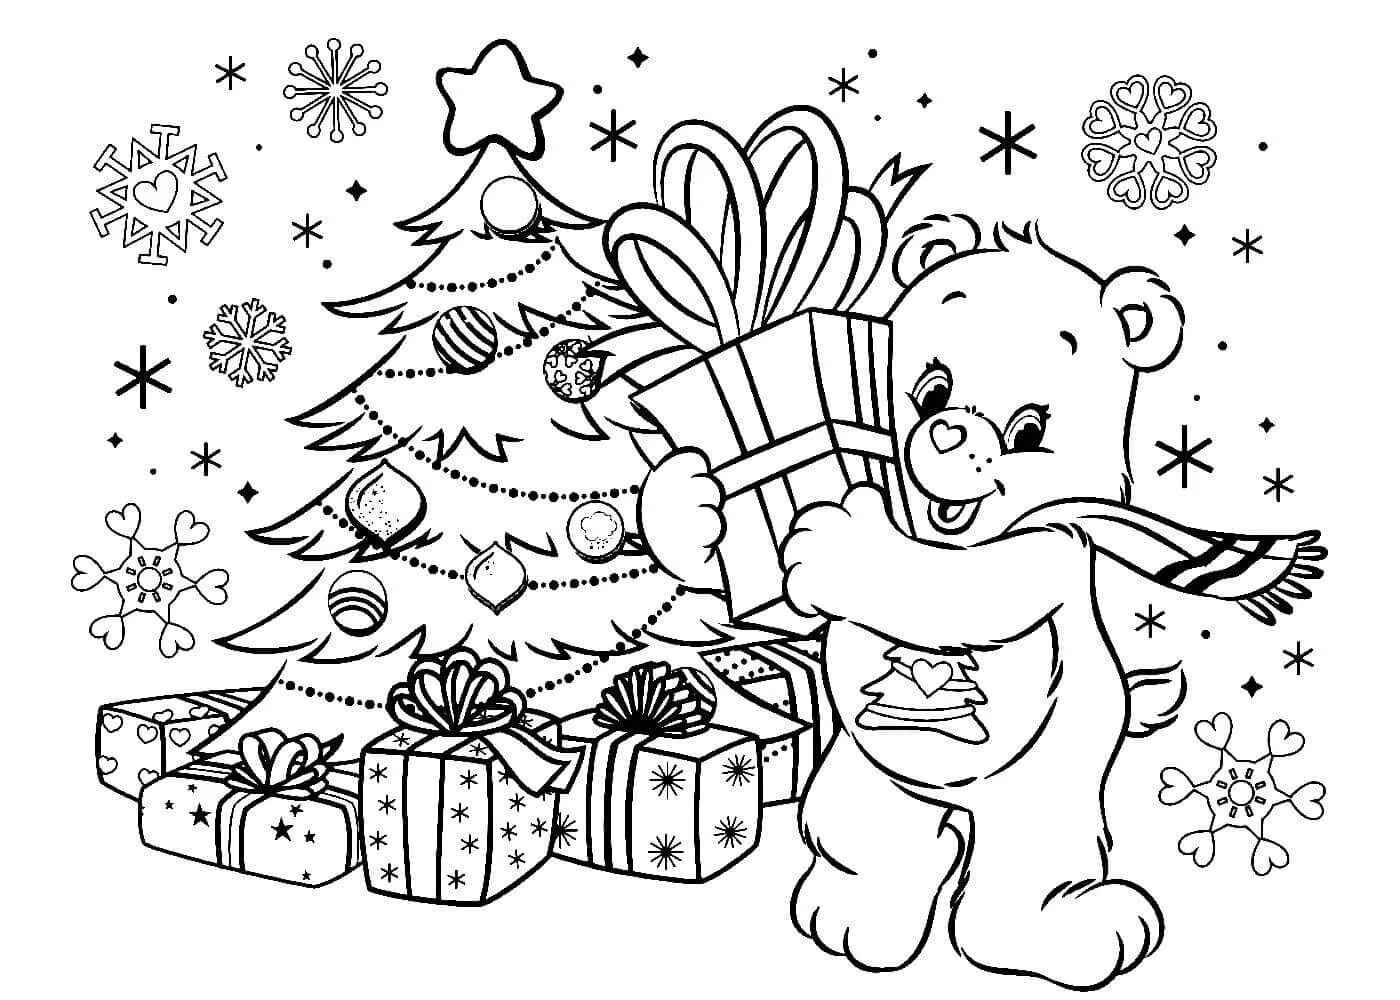 Glowing coloring book beautiful for the new year